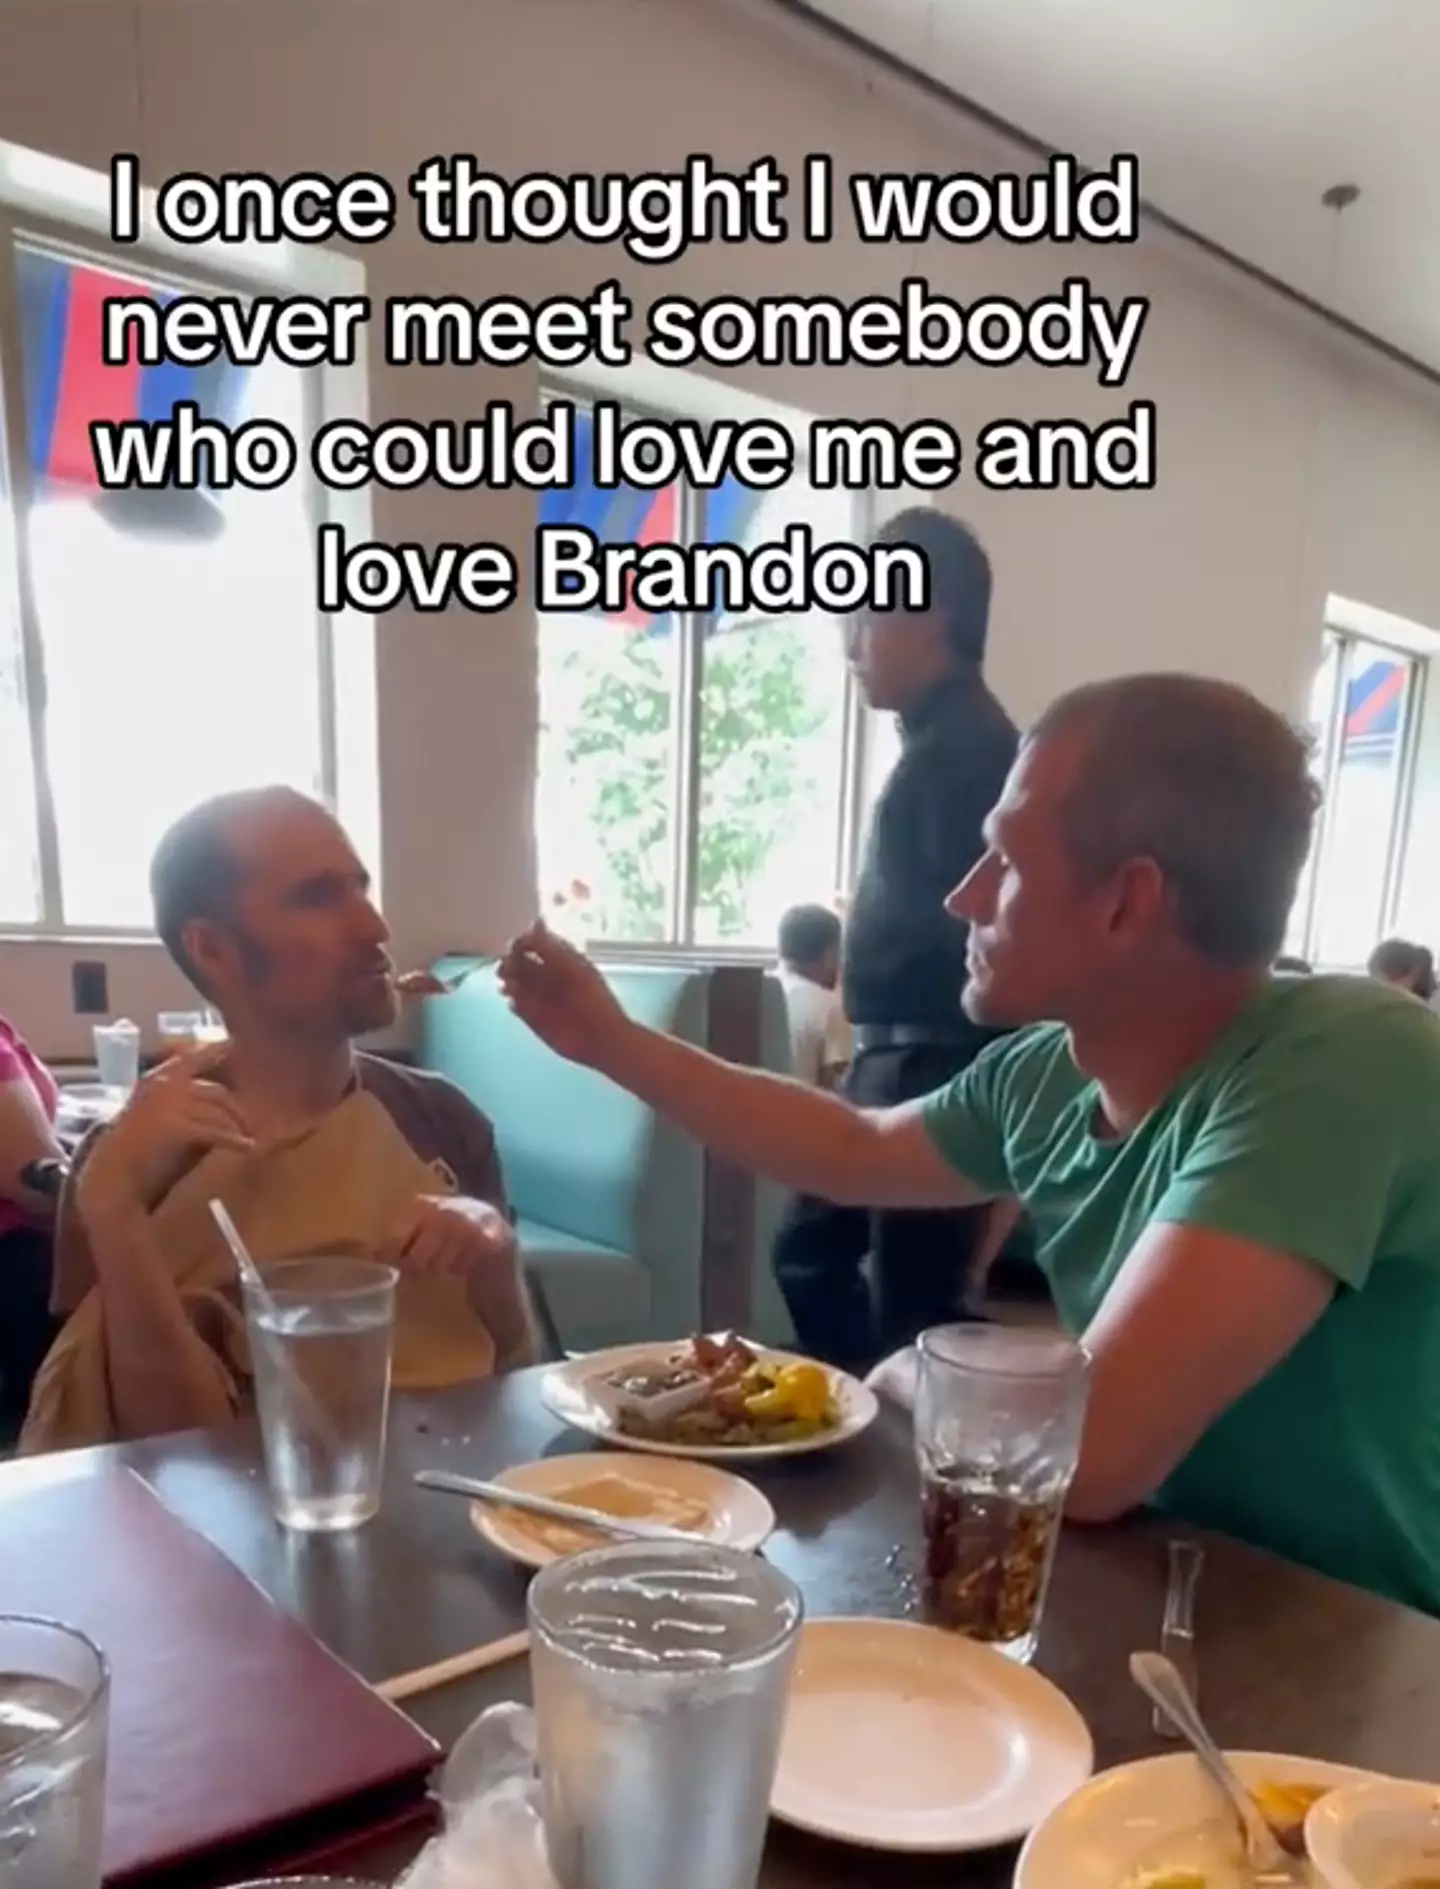 In a now-viral TikTok video, viewers have been stunned by the heartwarming footage of new husband James lovingly spot-feeding Brandon at a restaurant.